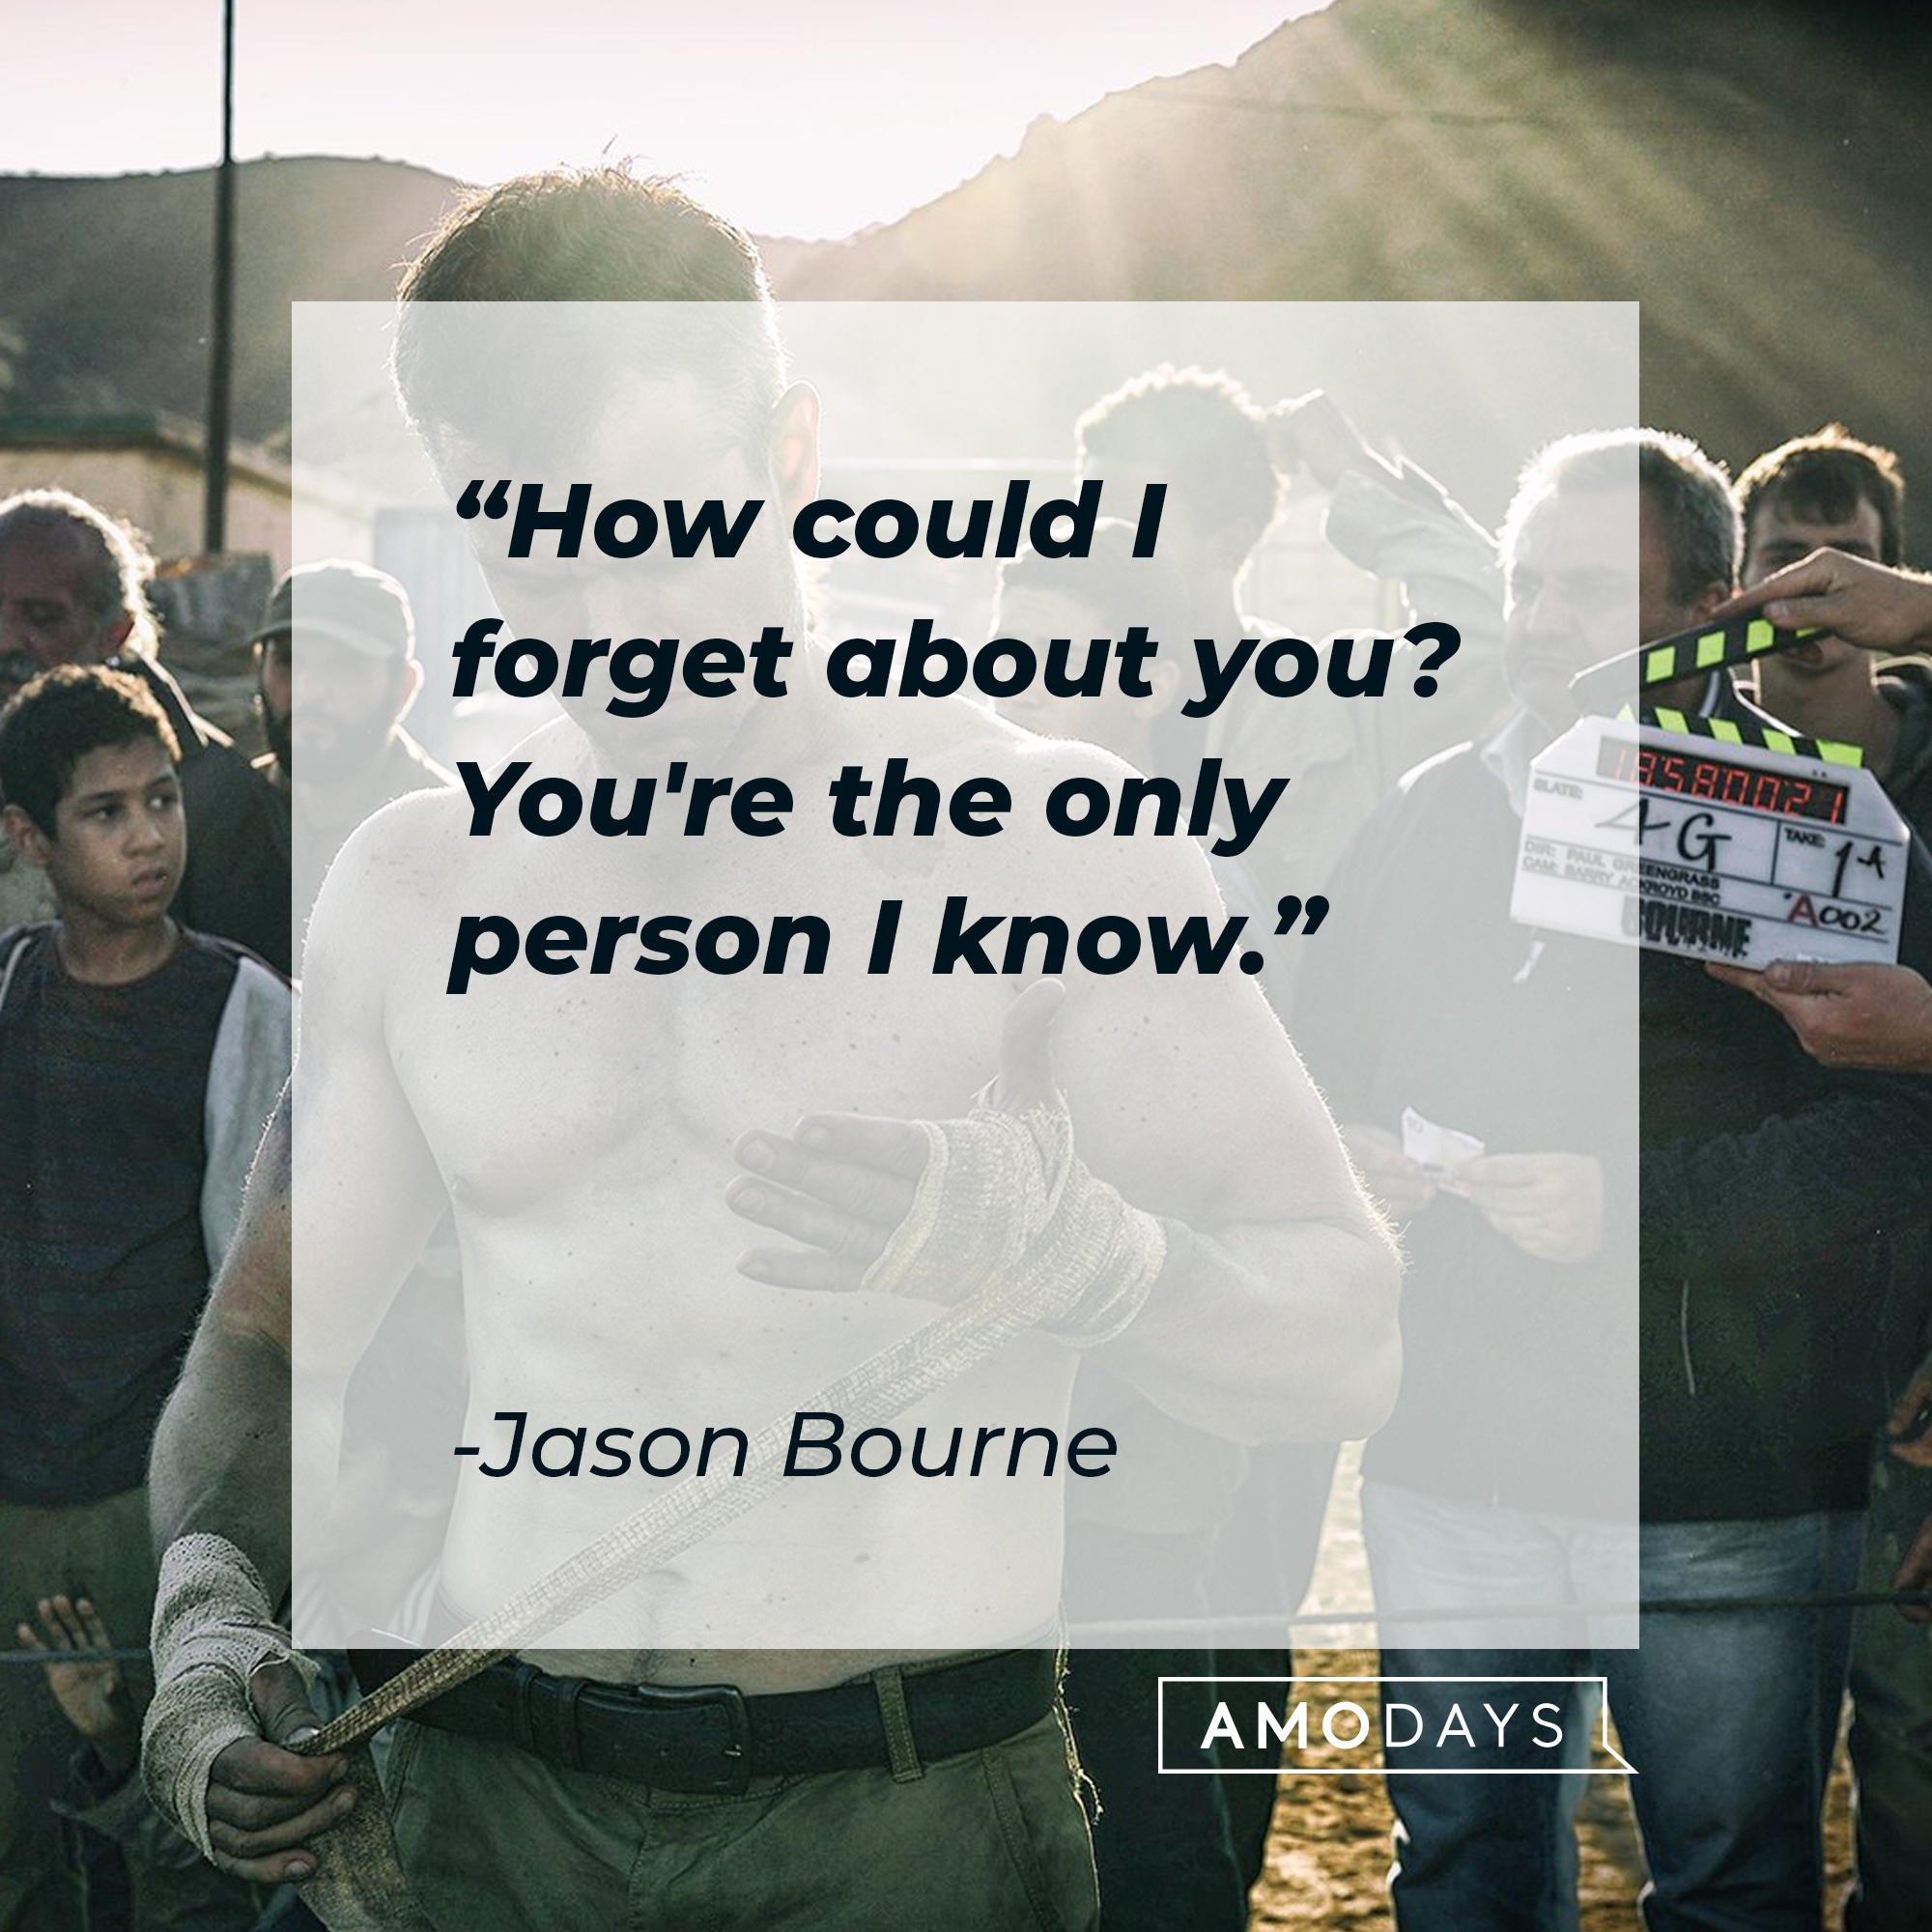 Jason Bourne's quote: "How could I forget about you? You're the only person I know." | Source: facebook.com/TheBourneSeries